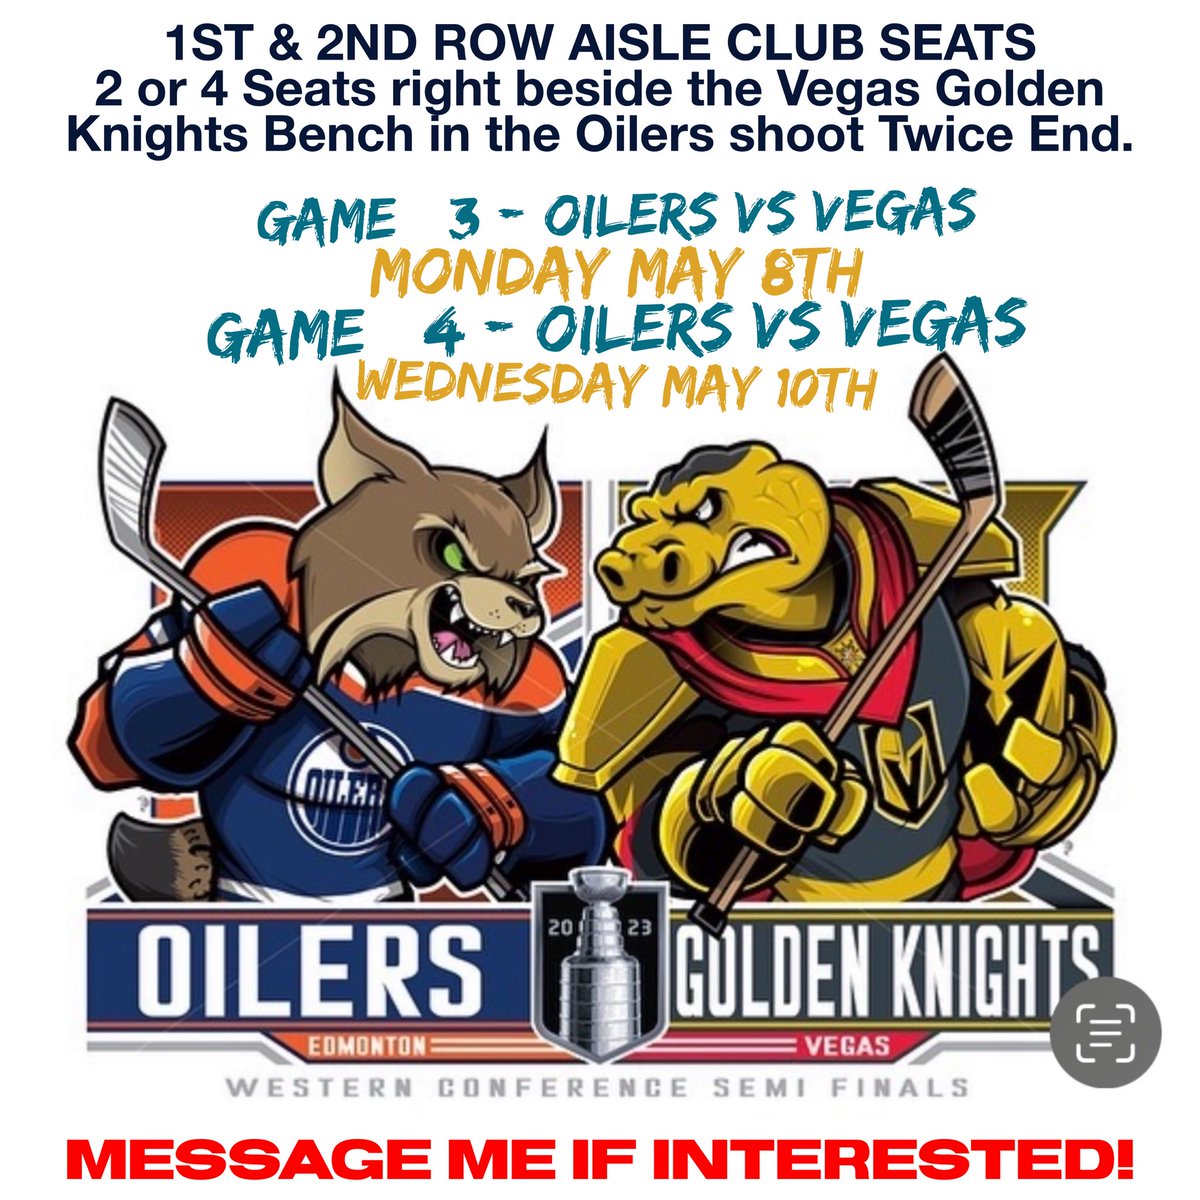 🏒Playoffs Baby🏒 1ST & 2ND ROW AISLE CLUB SEATS 2 or 4 Seats right beside the Vegas Golden Knights Bench in the Oilers shoot Twice End. GAME #3 - OILERS vs VEGAS Monday May 8th